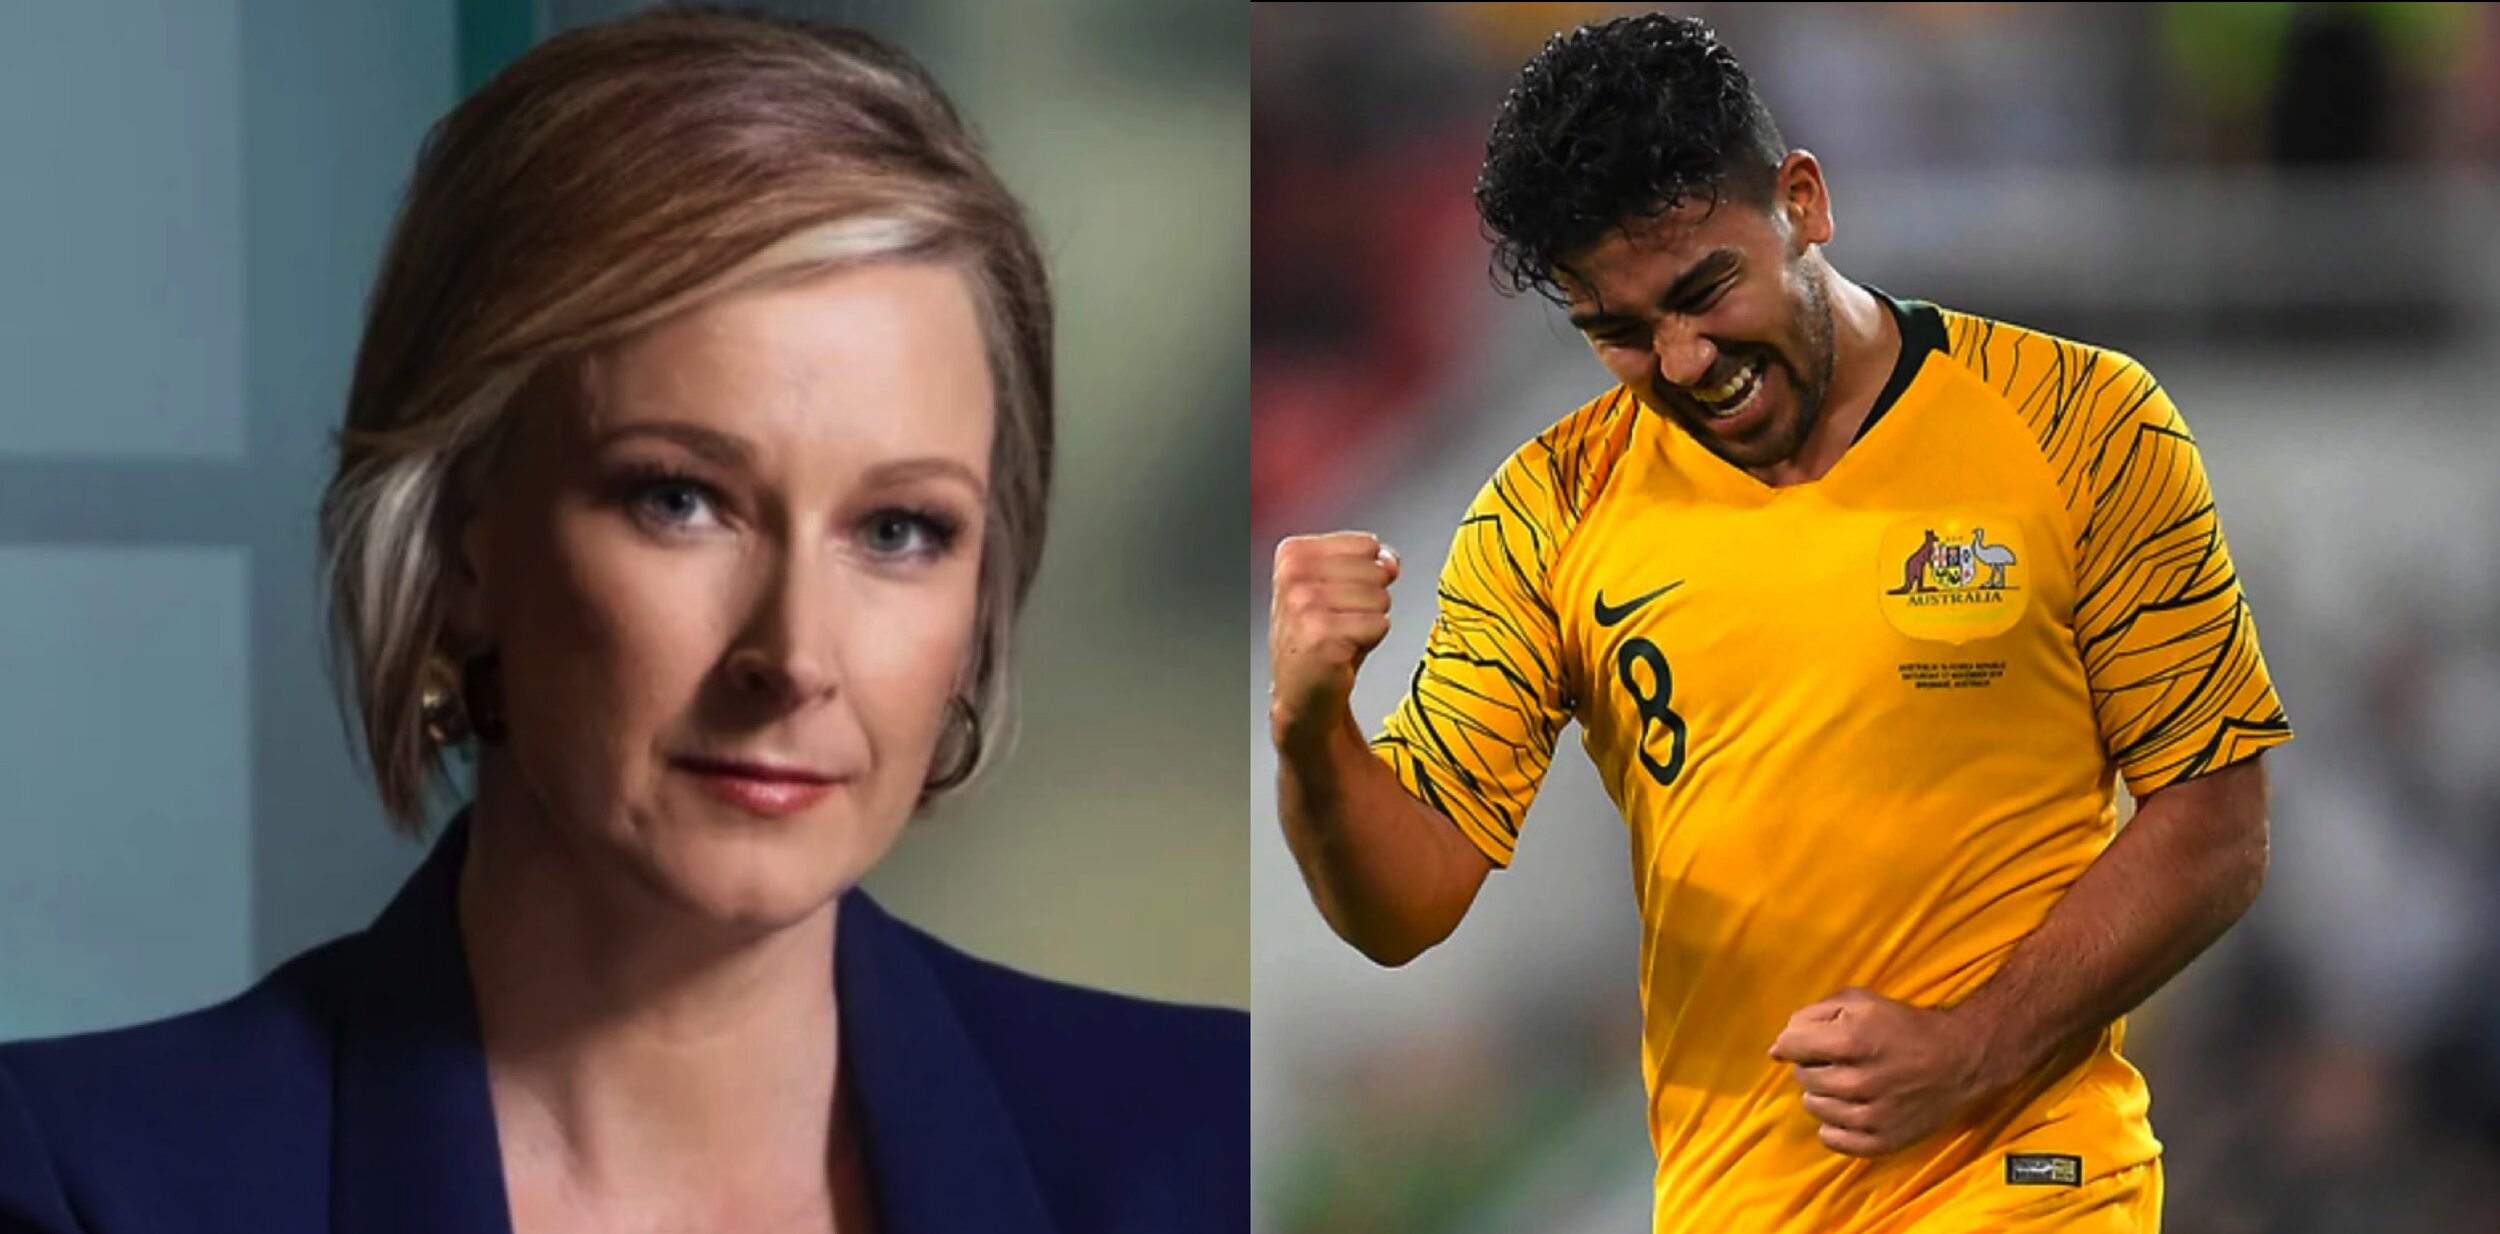   Leigh Sales vs the Socceroos  